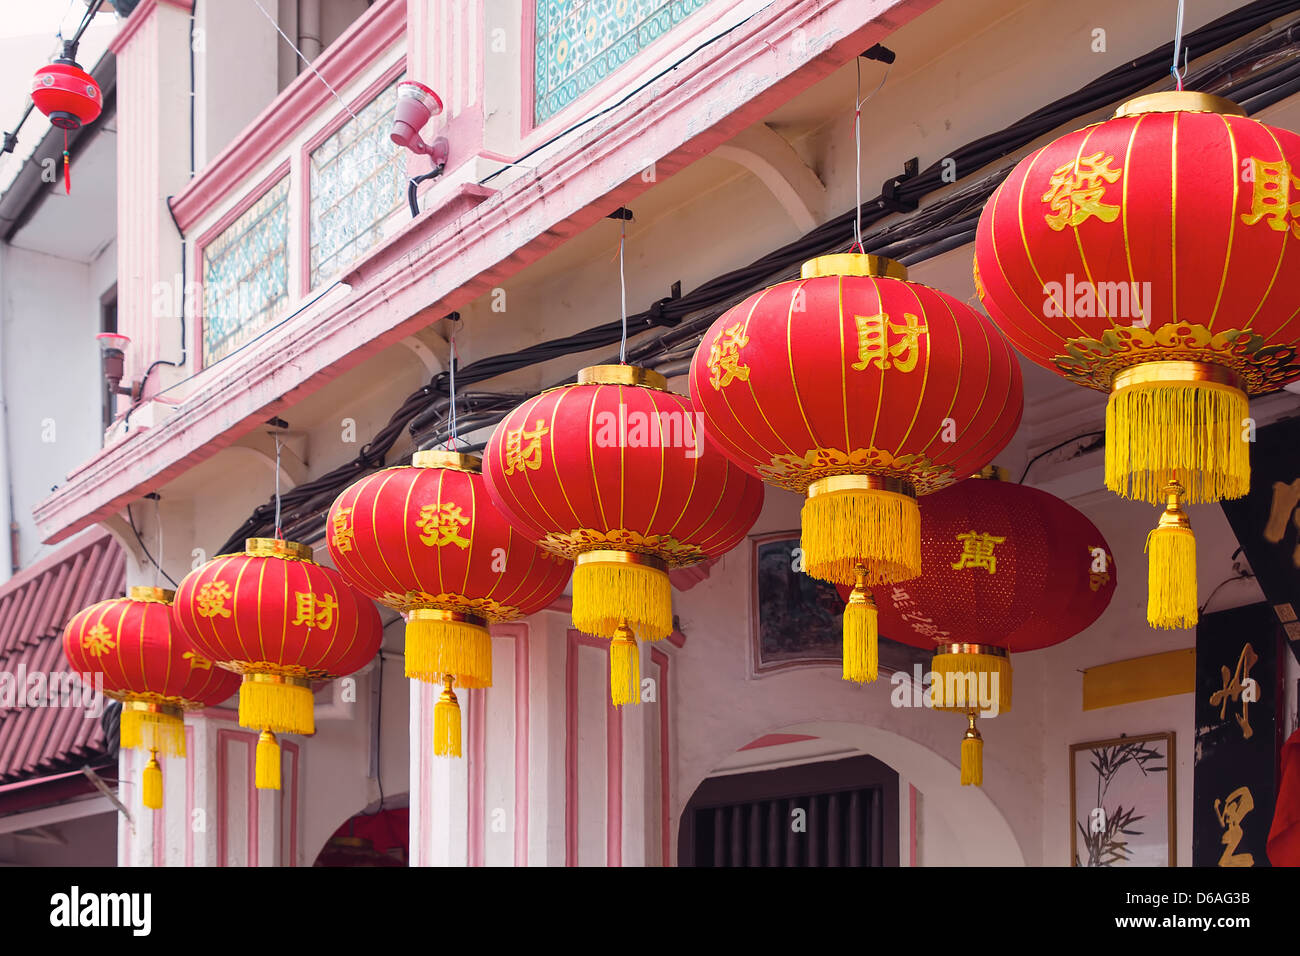 Chinese New Year Red Lanterns with Chinese Text Wishing Good Fortune Hanging on Historic Peranakan Buildings Exterior Stock Photo